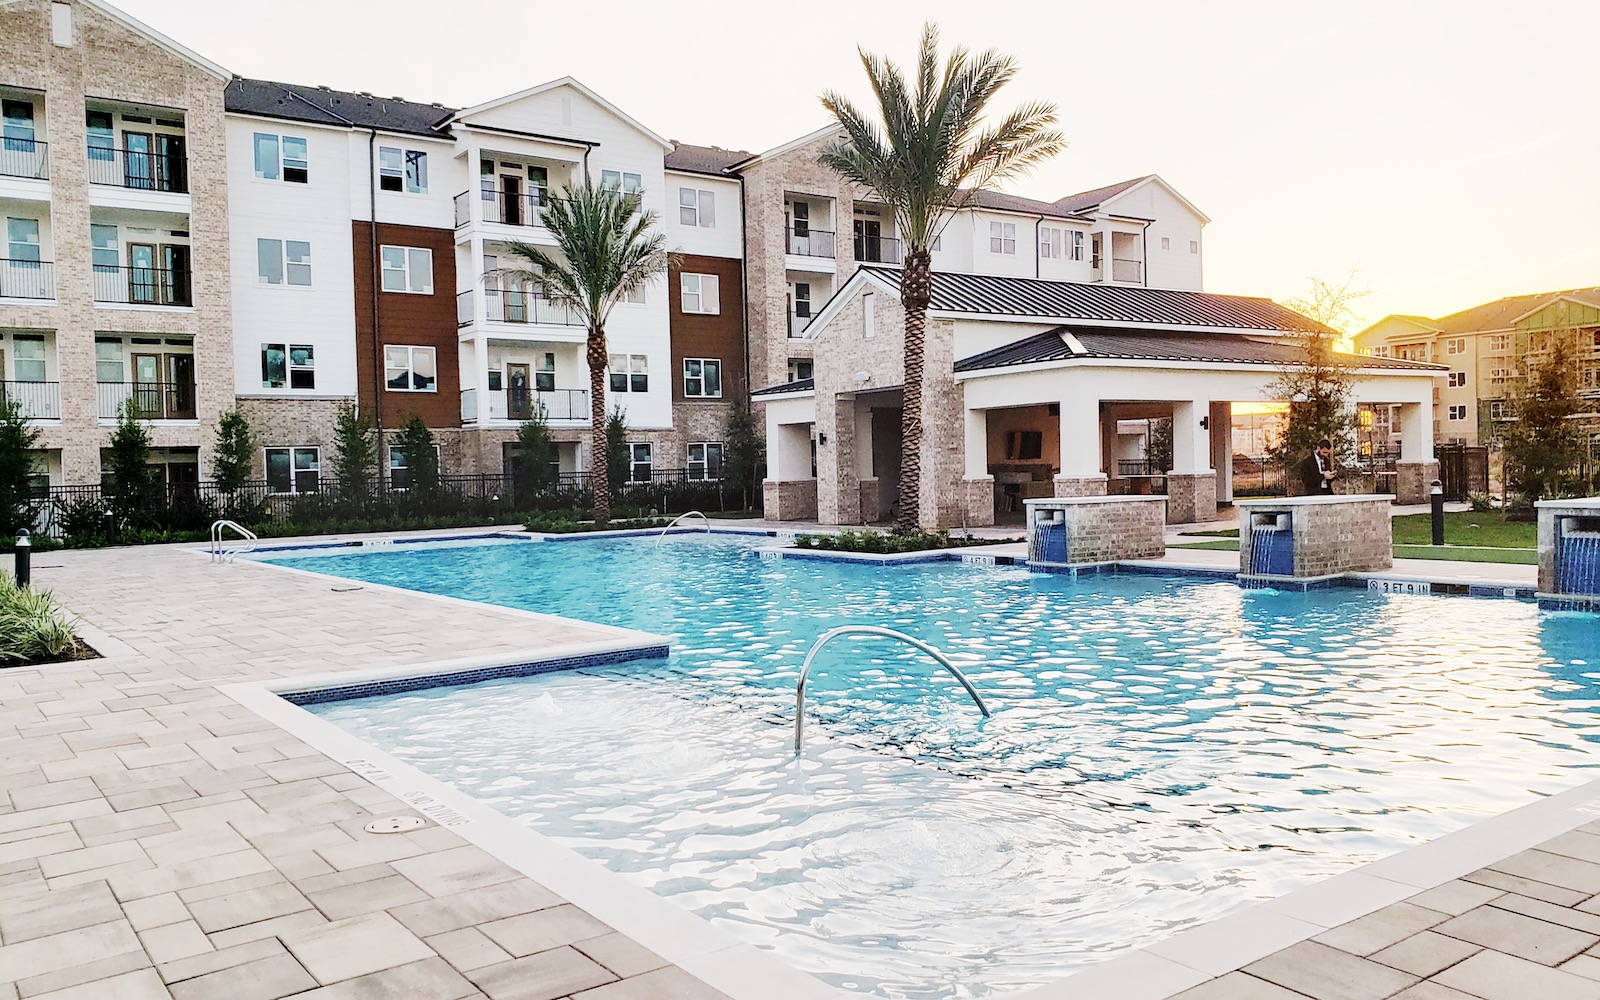 new apartments in katy tx 2019